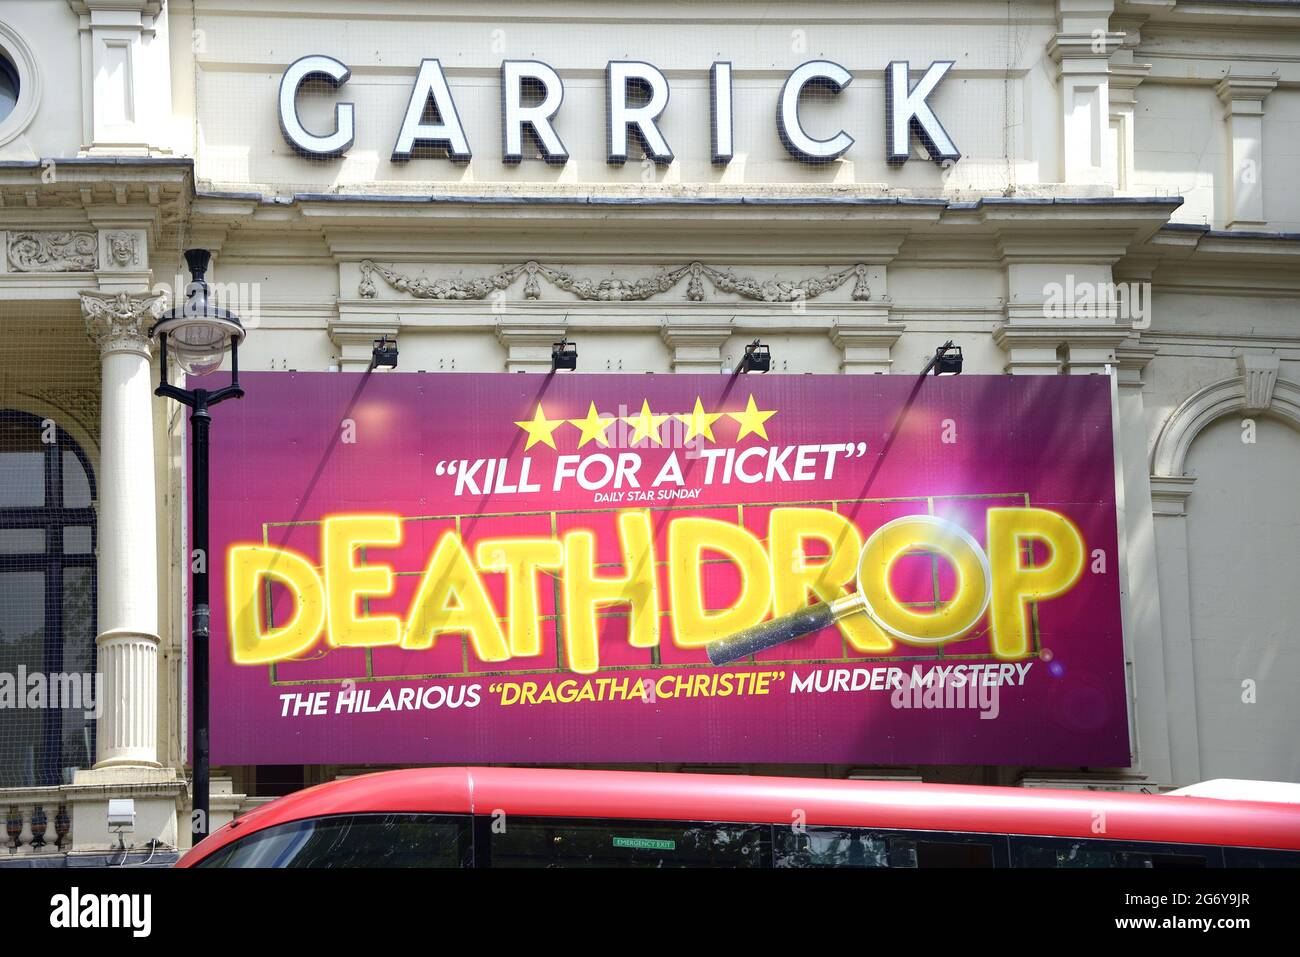 London, England, UK. 'Deathdrop' at the Garrick Theatre, July 2021. Drag Murder Mystery Stock Photo